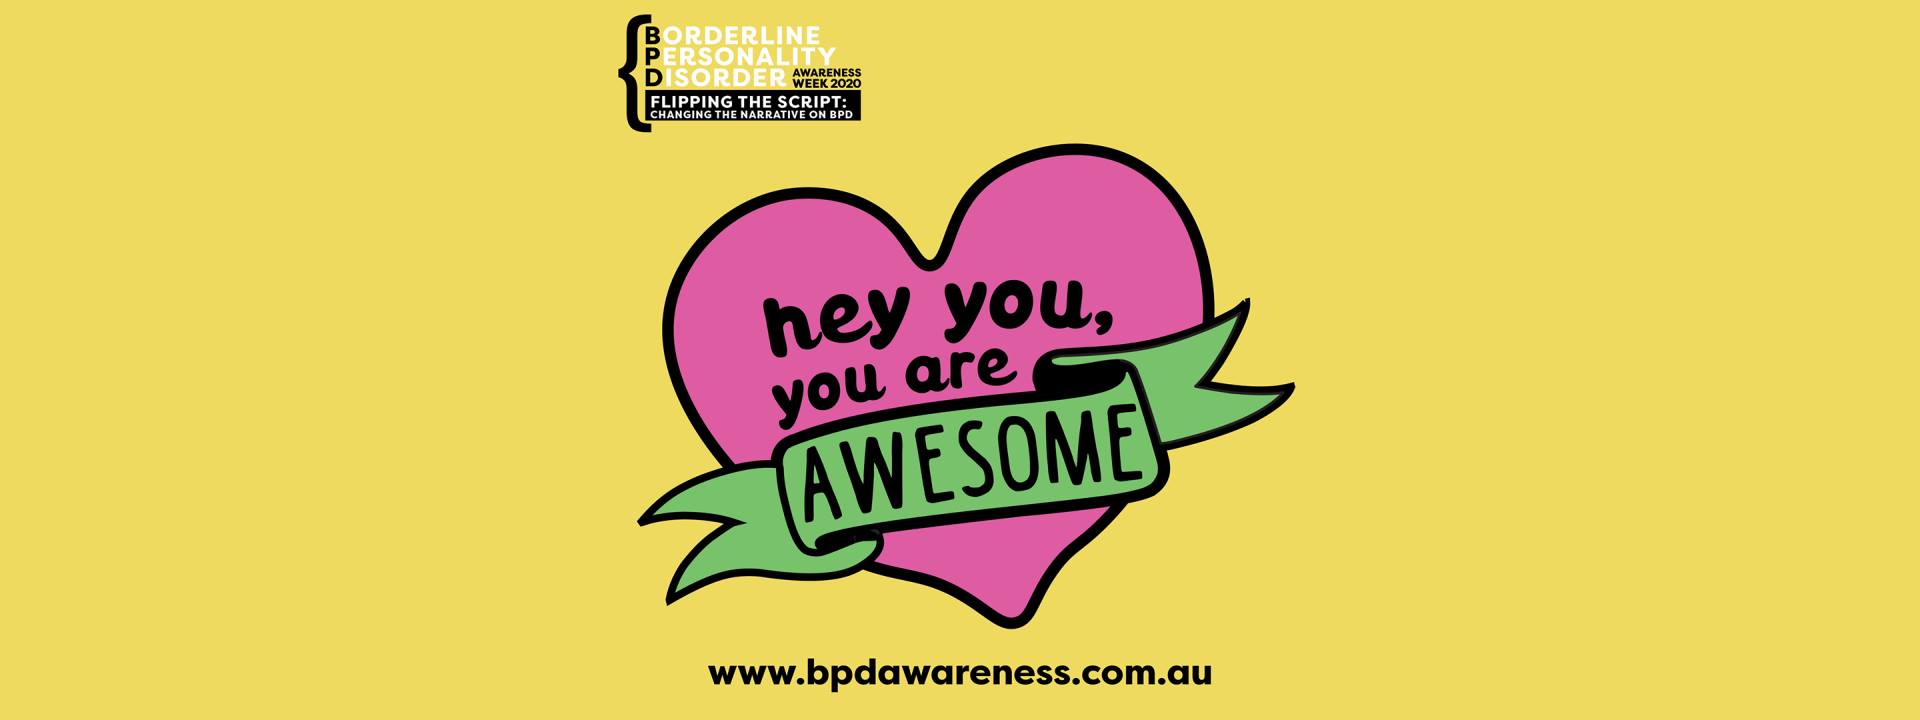 BPD Awareness Week 2020 - You are Awesome